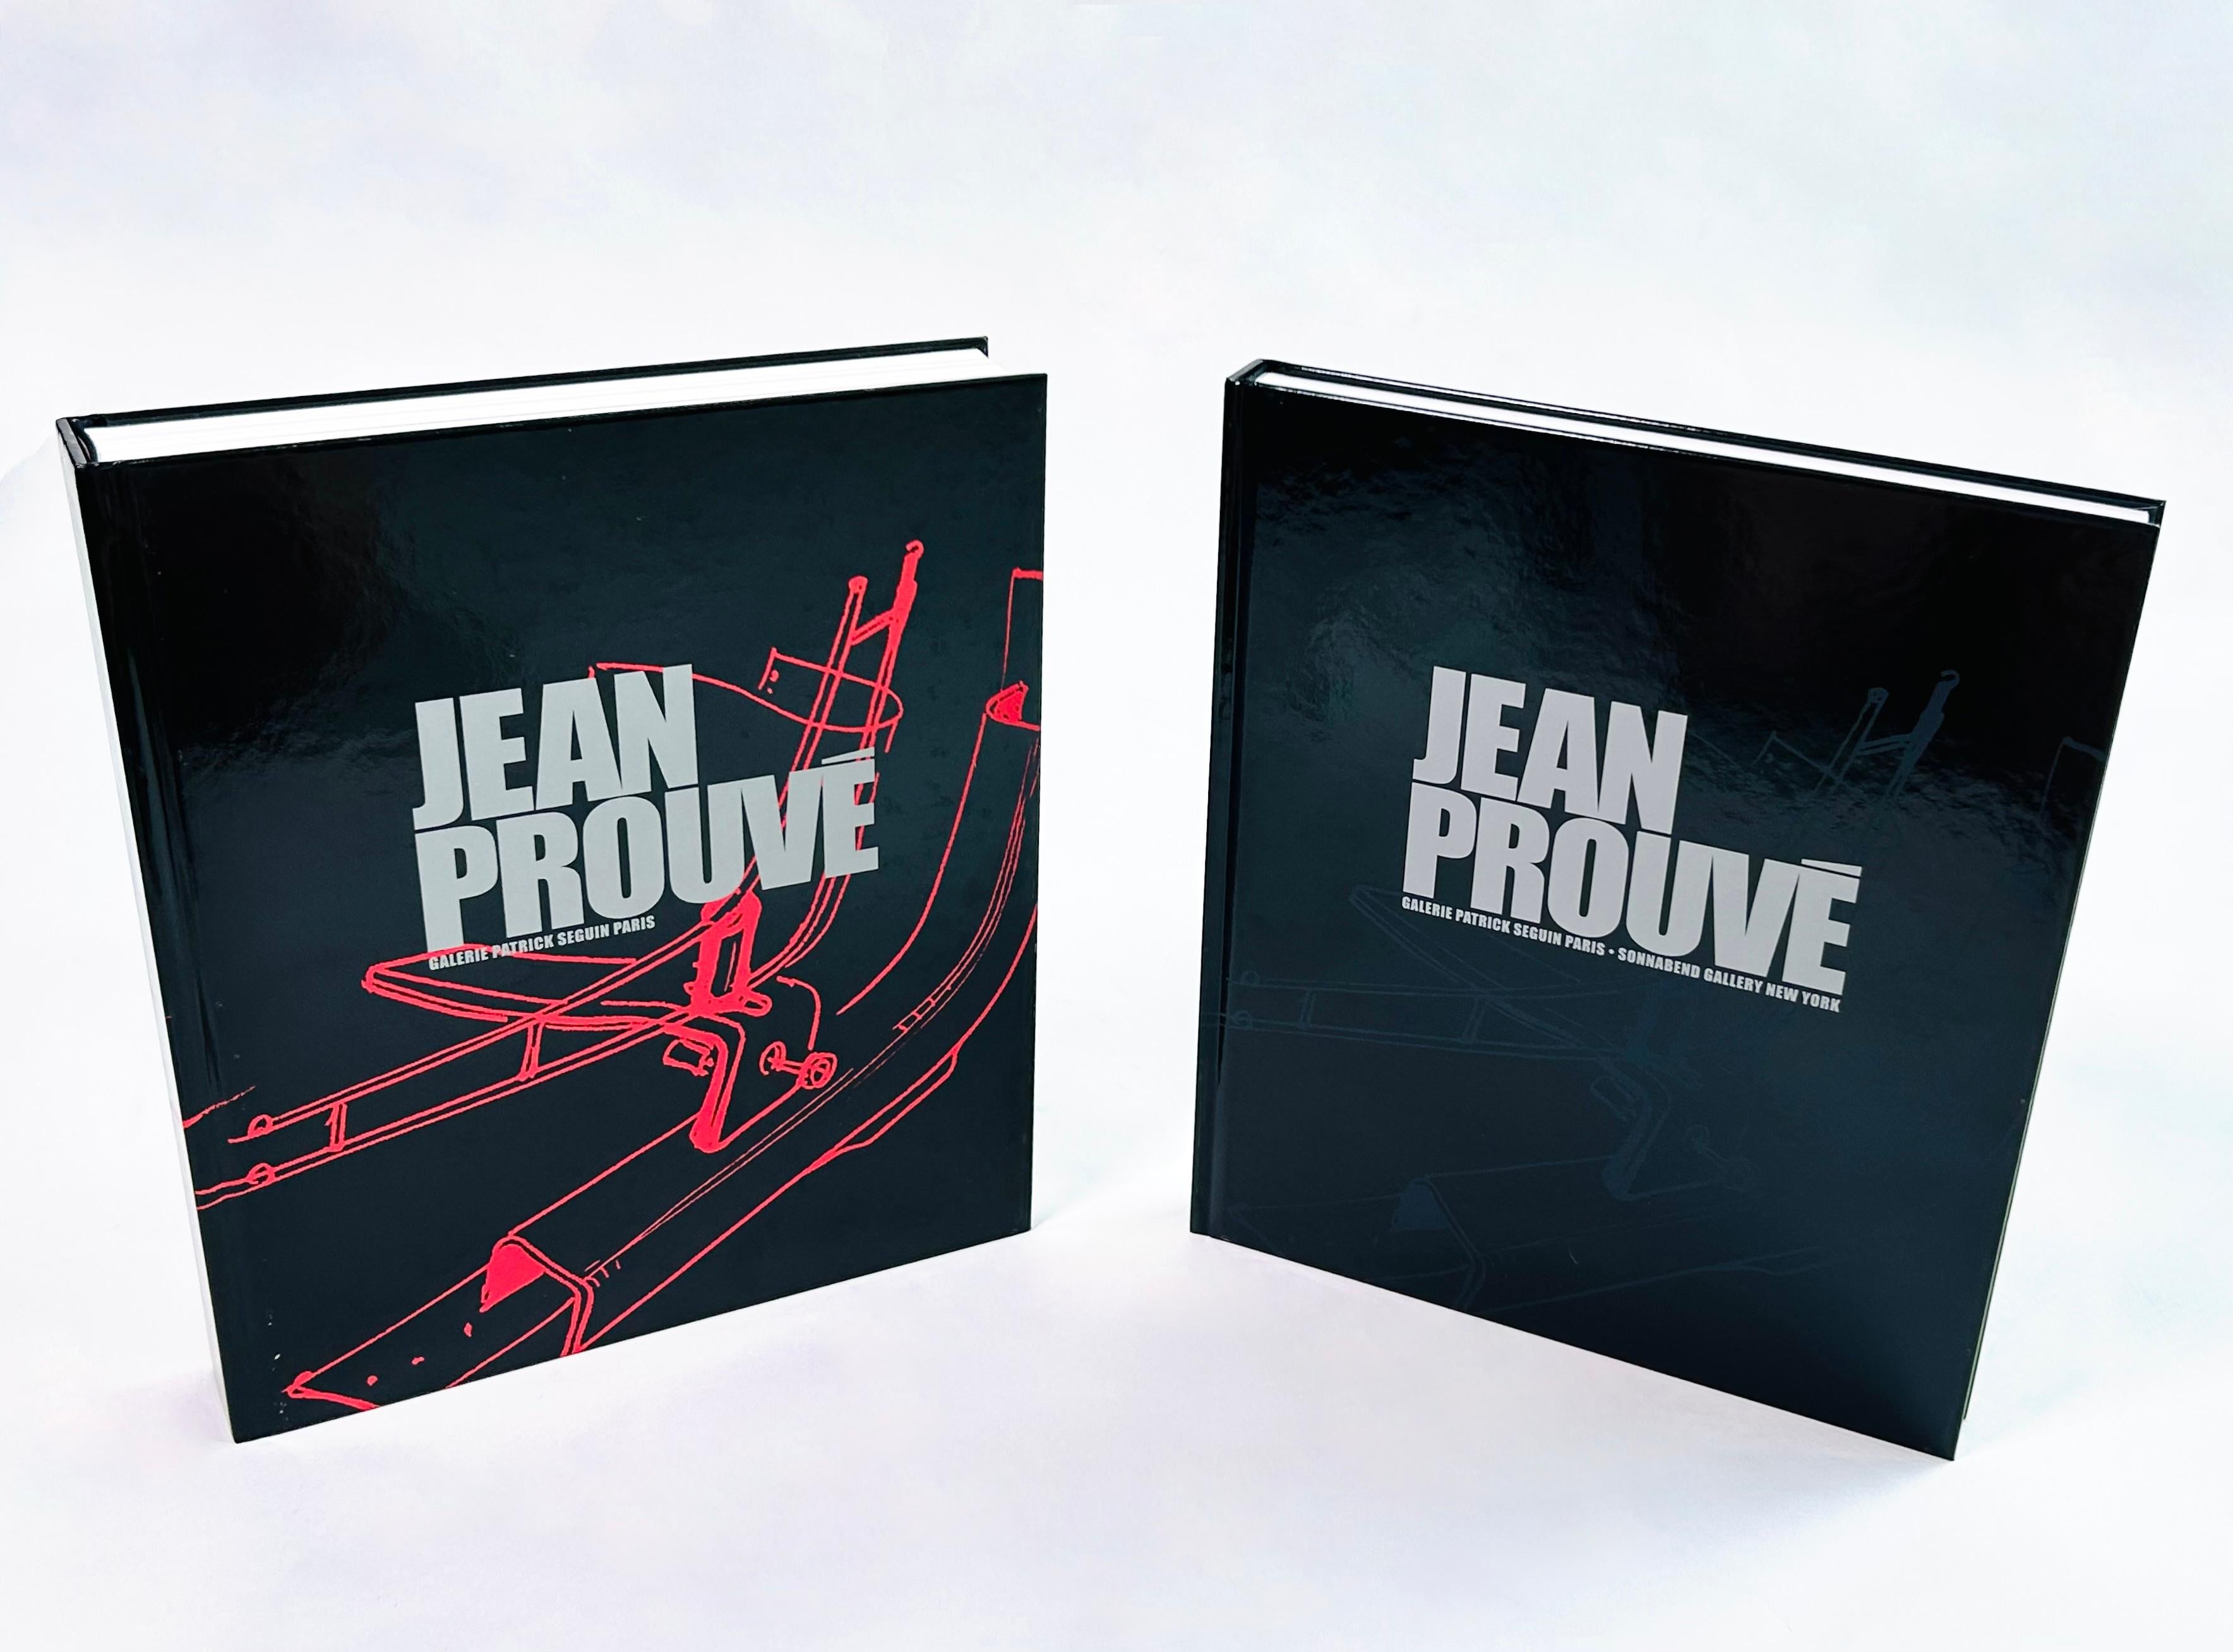 2007 edition, New Old Stock, two volume Jean Prouvé book by Galerie Patrick Sequin and Sonnabend Gallery with text in French and English.
Available unused and wrapped with its original plastic wrap packaging.
617 pages.